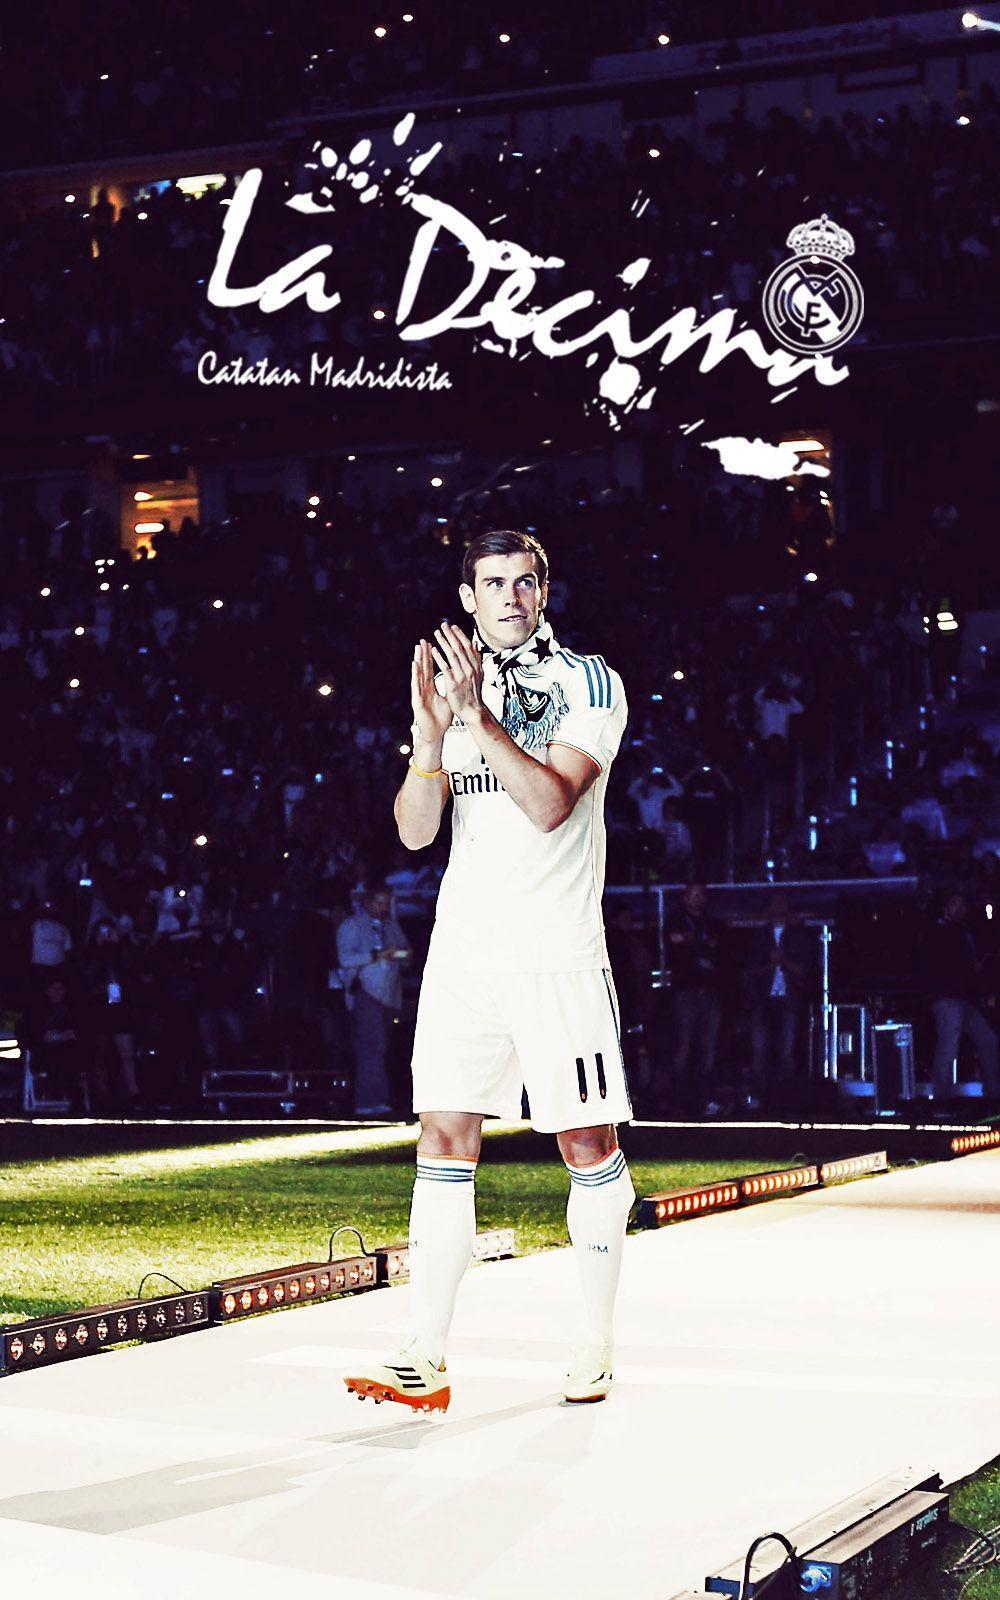 Gareth Bale Cool Wallpaper For iPhone and Android